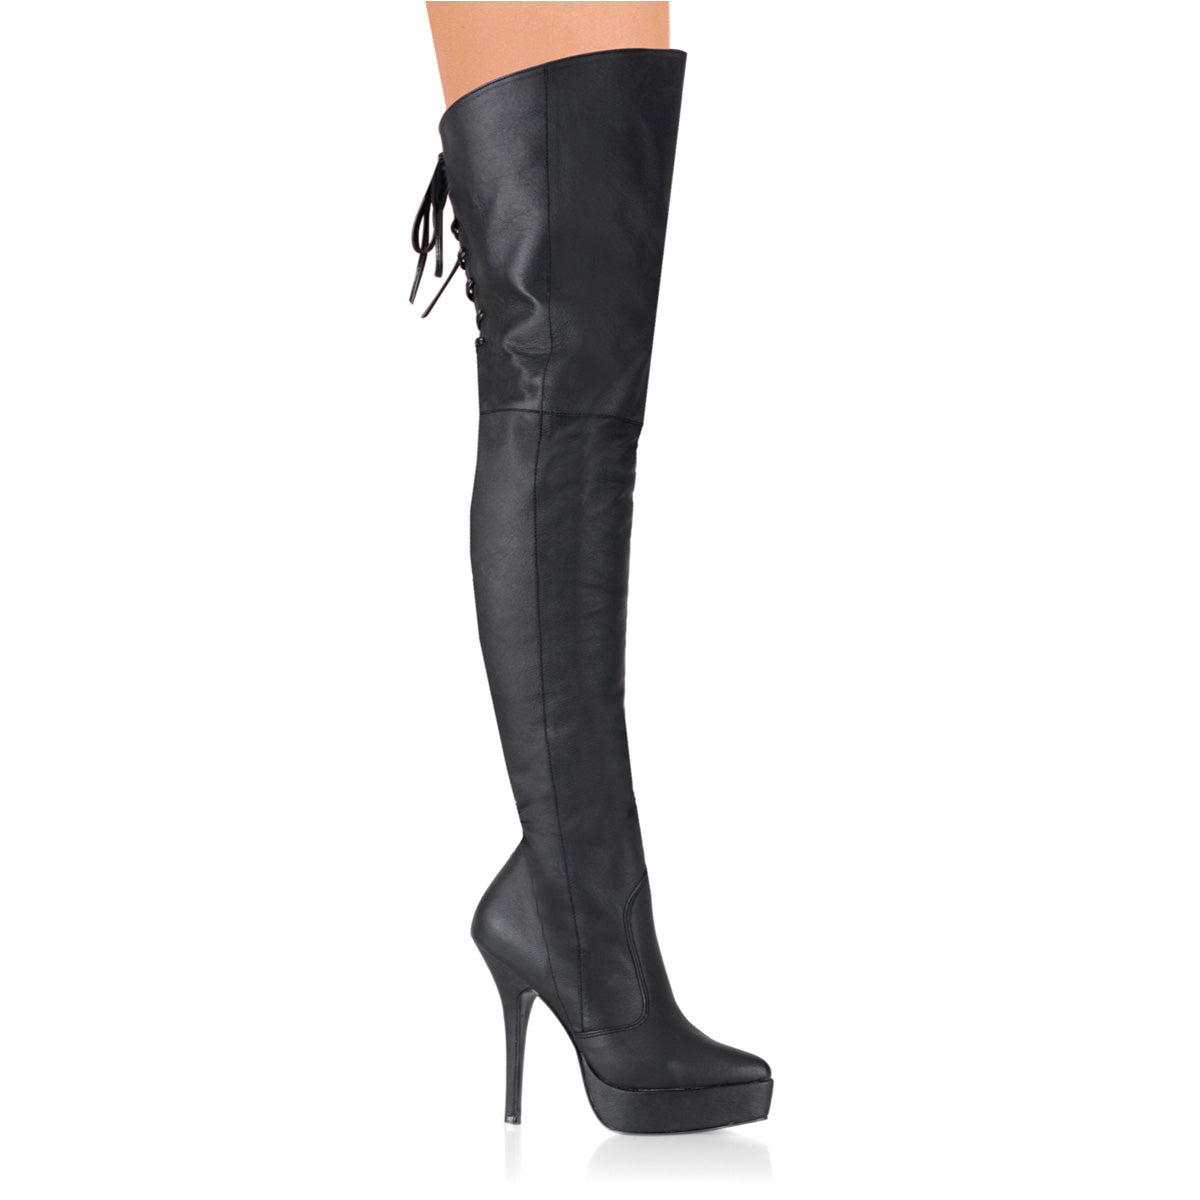 INDULGE-3011 Devious 5" Heel Black Leather Sexy Thigh Boots